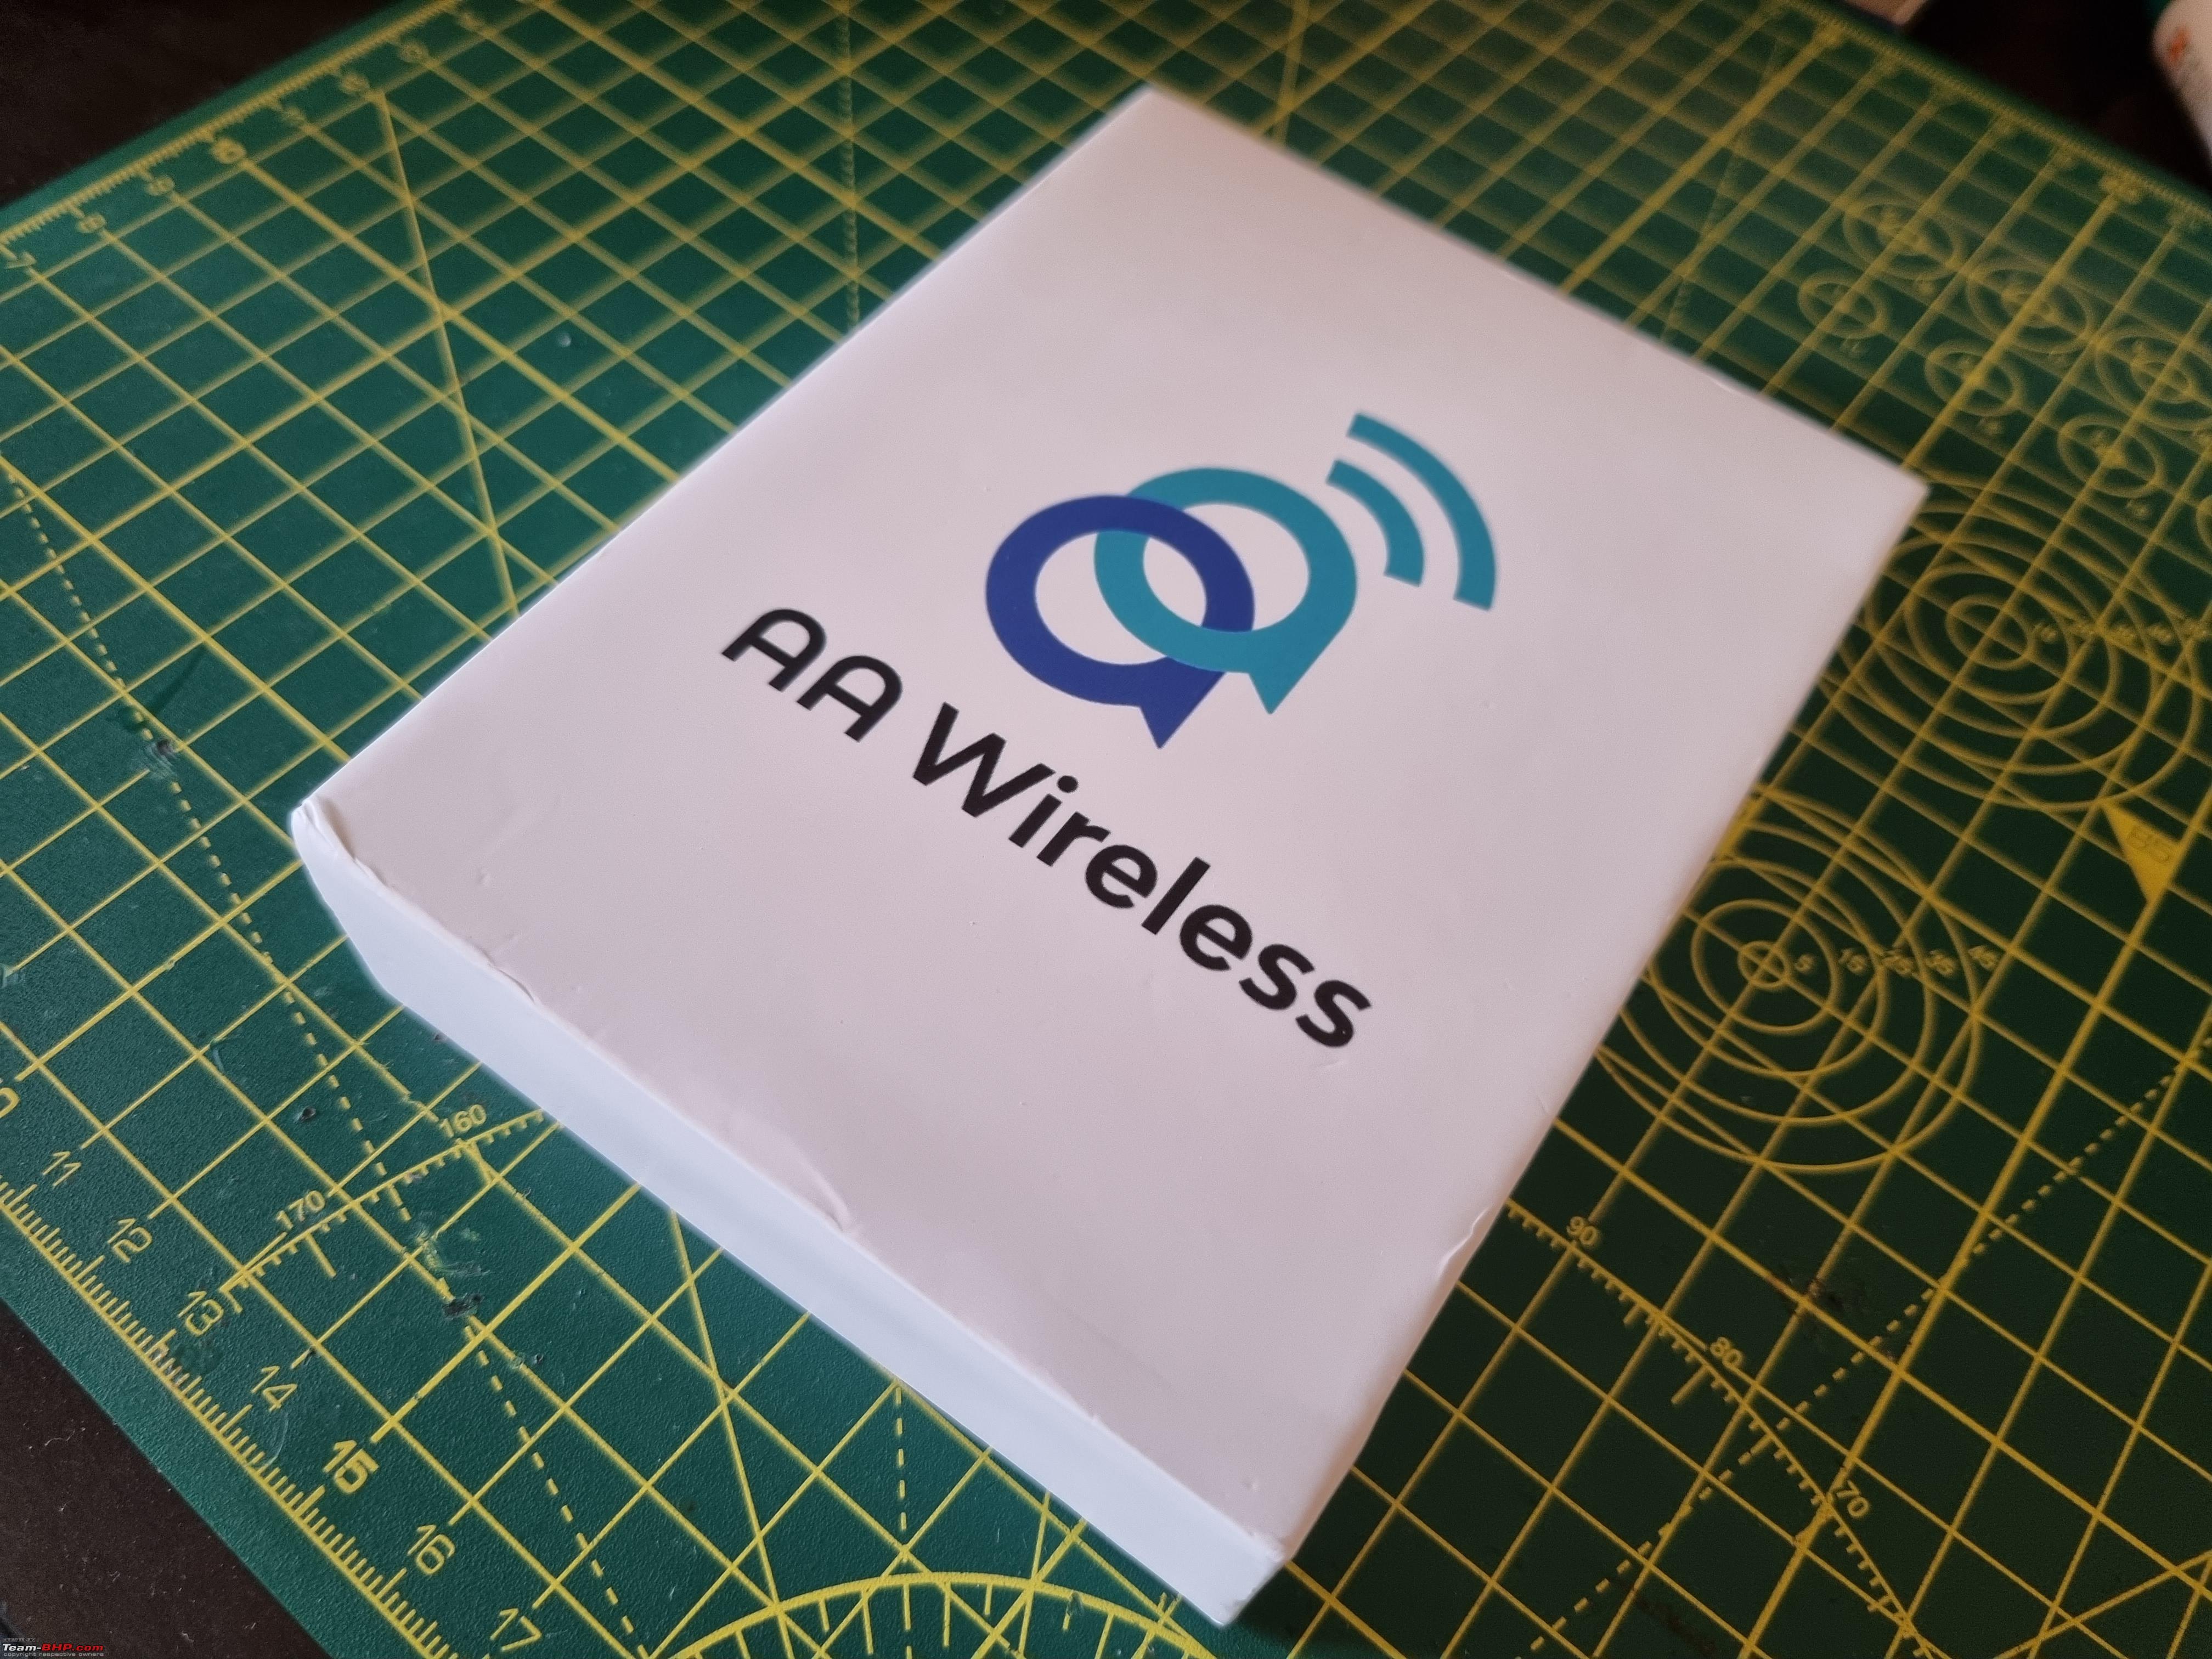 AAWireless - Indiegogo project for wireless Android Auto dongle